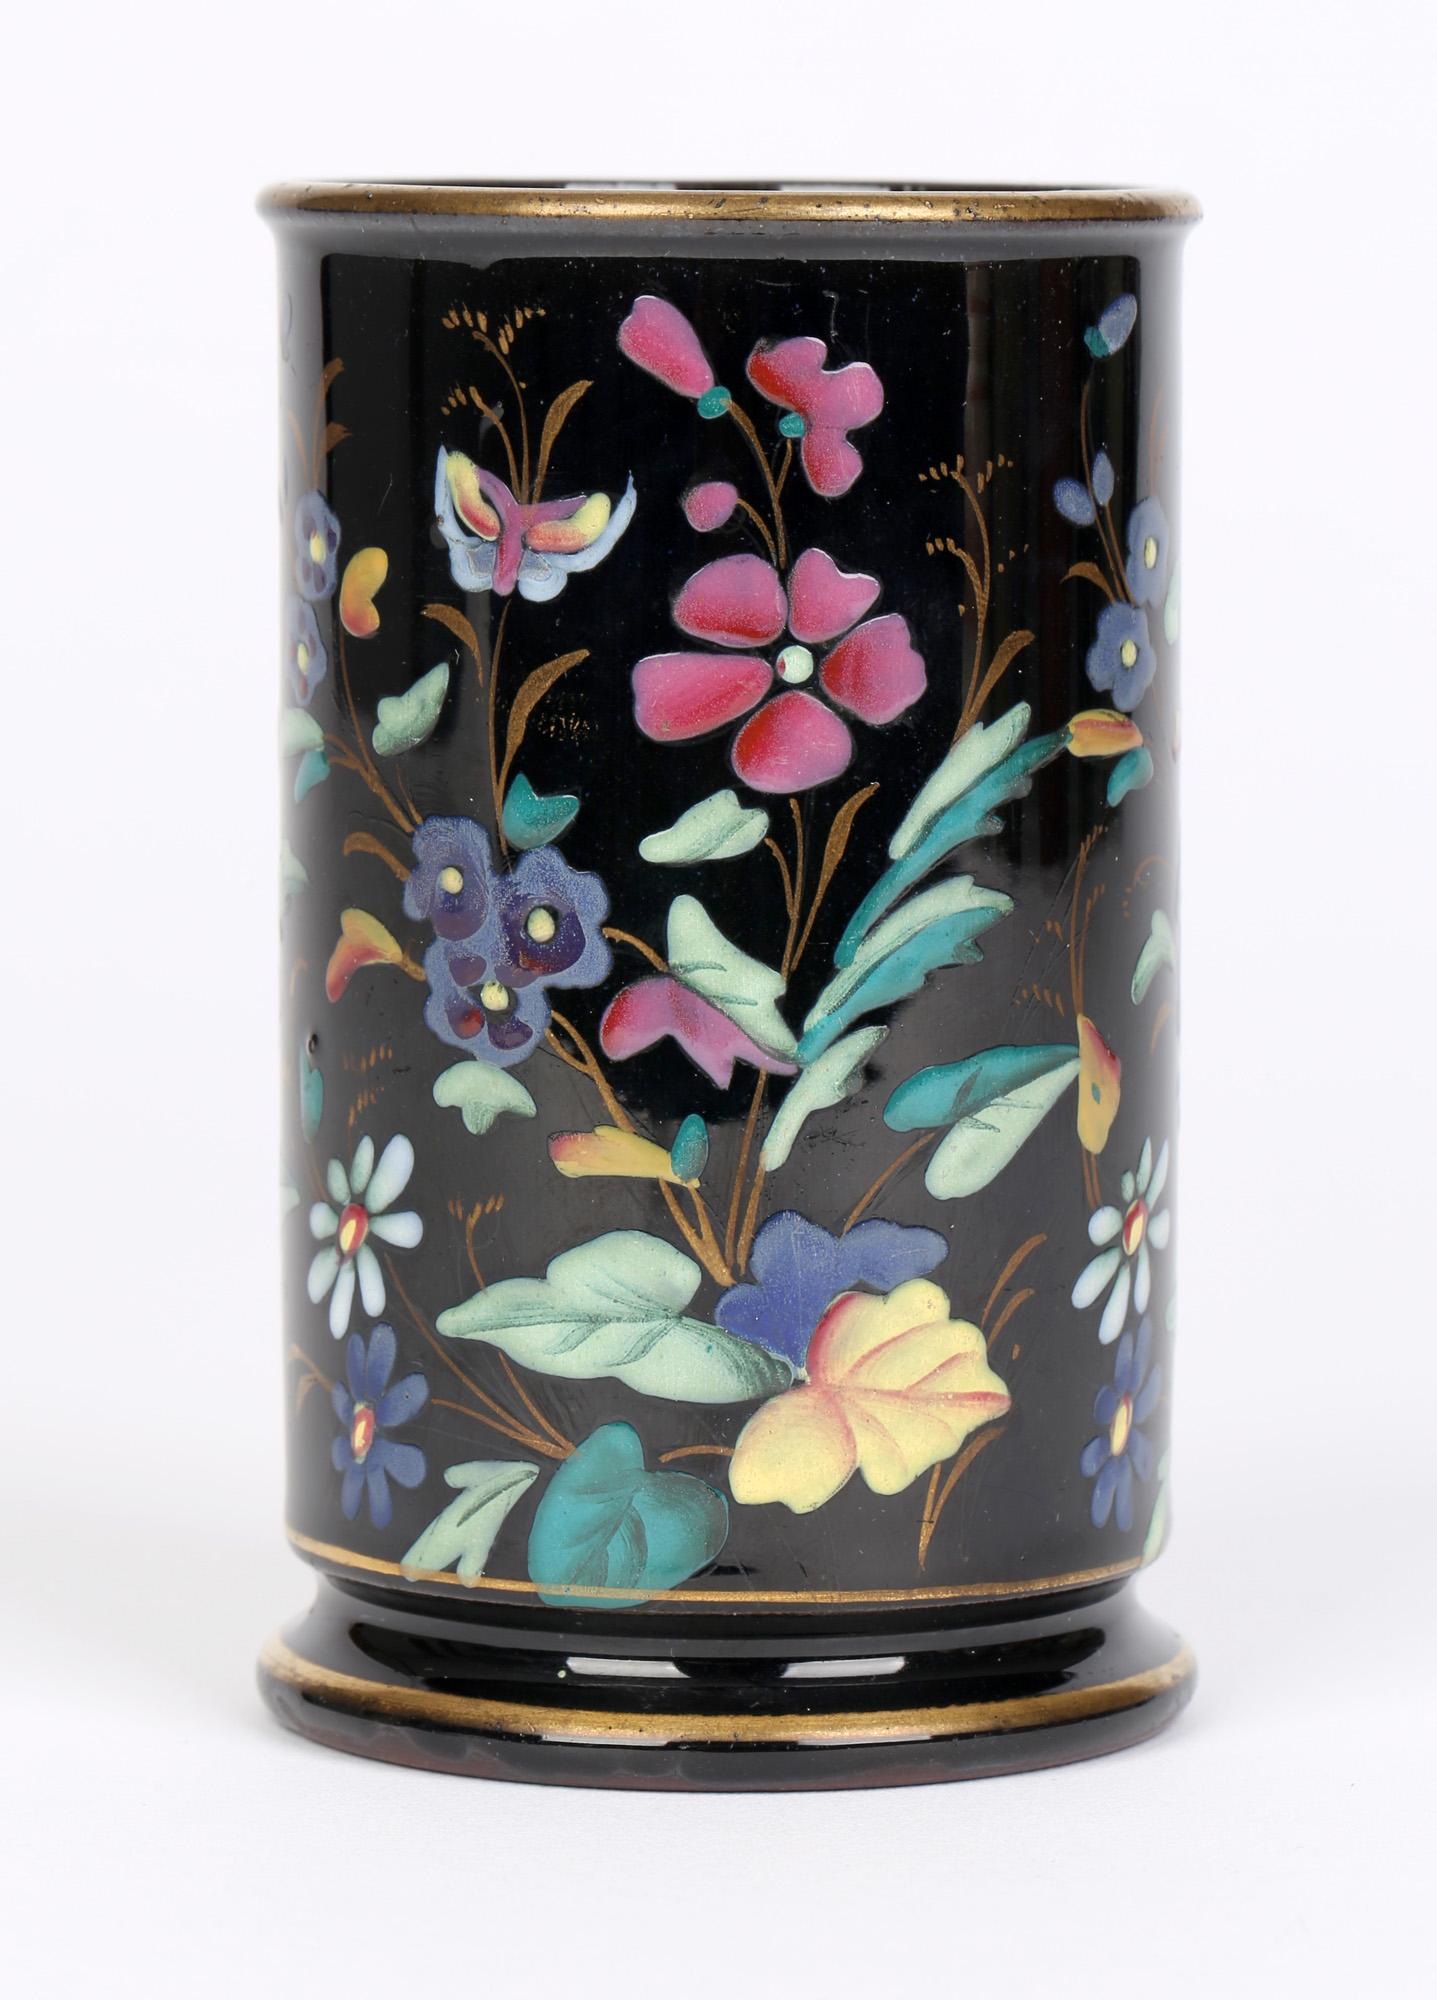 19th Century Victorian Jackfield Style Ceramic Vase with Hand Enameled Floral Designs